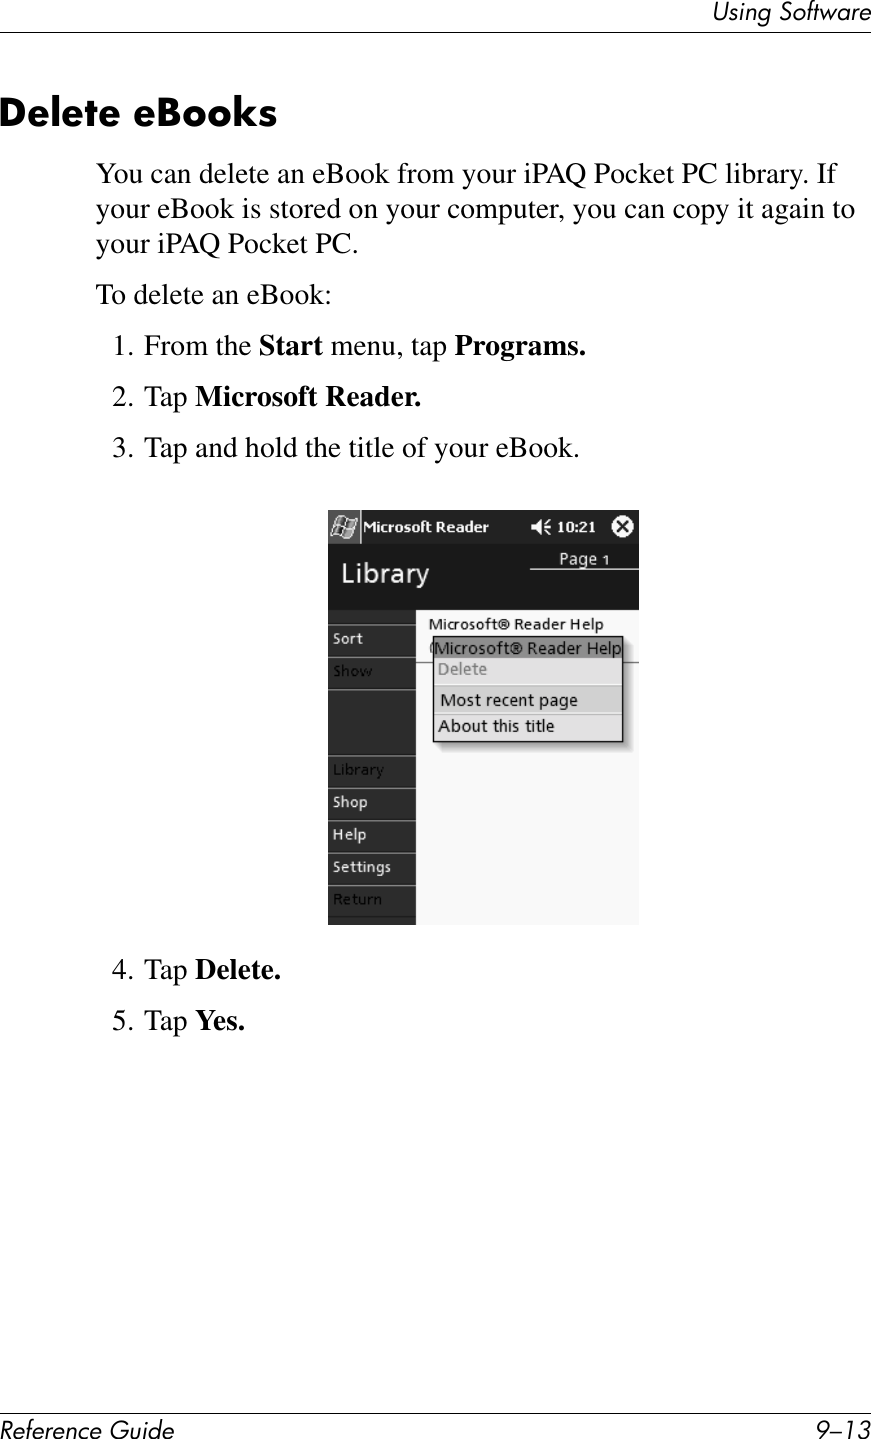 UL*%2&apos;37#1V4$&quot;!&quot;#&quot;$&quot;%&amp;&quot;&apos;()*+&quot; H/.9U&quot;@&quot;7&quot;&amp;&quot;C66T8You can delete an eBook from your iPAQ Pocket PC library. If your eBook is stored on your computer, you can copy it again to your iPAQ Pocket PC.To delete an eBook:1. From the Start menu, tap Programs.2. Tap Microsoft Reader.3. Tap and hold the title of your eBook.4. Tap Delete.5. Tap Yes.